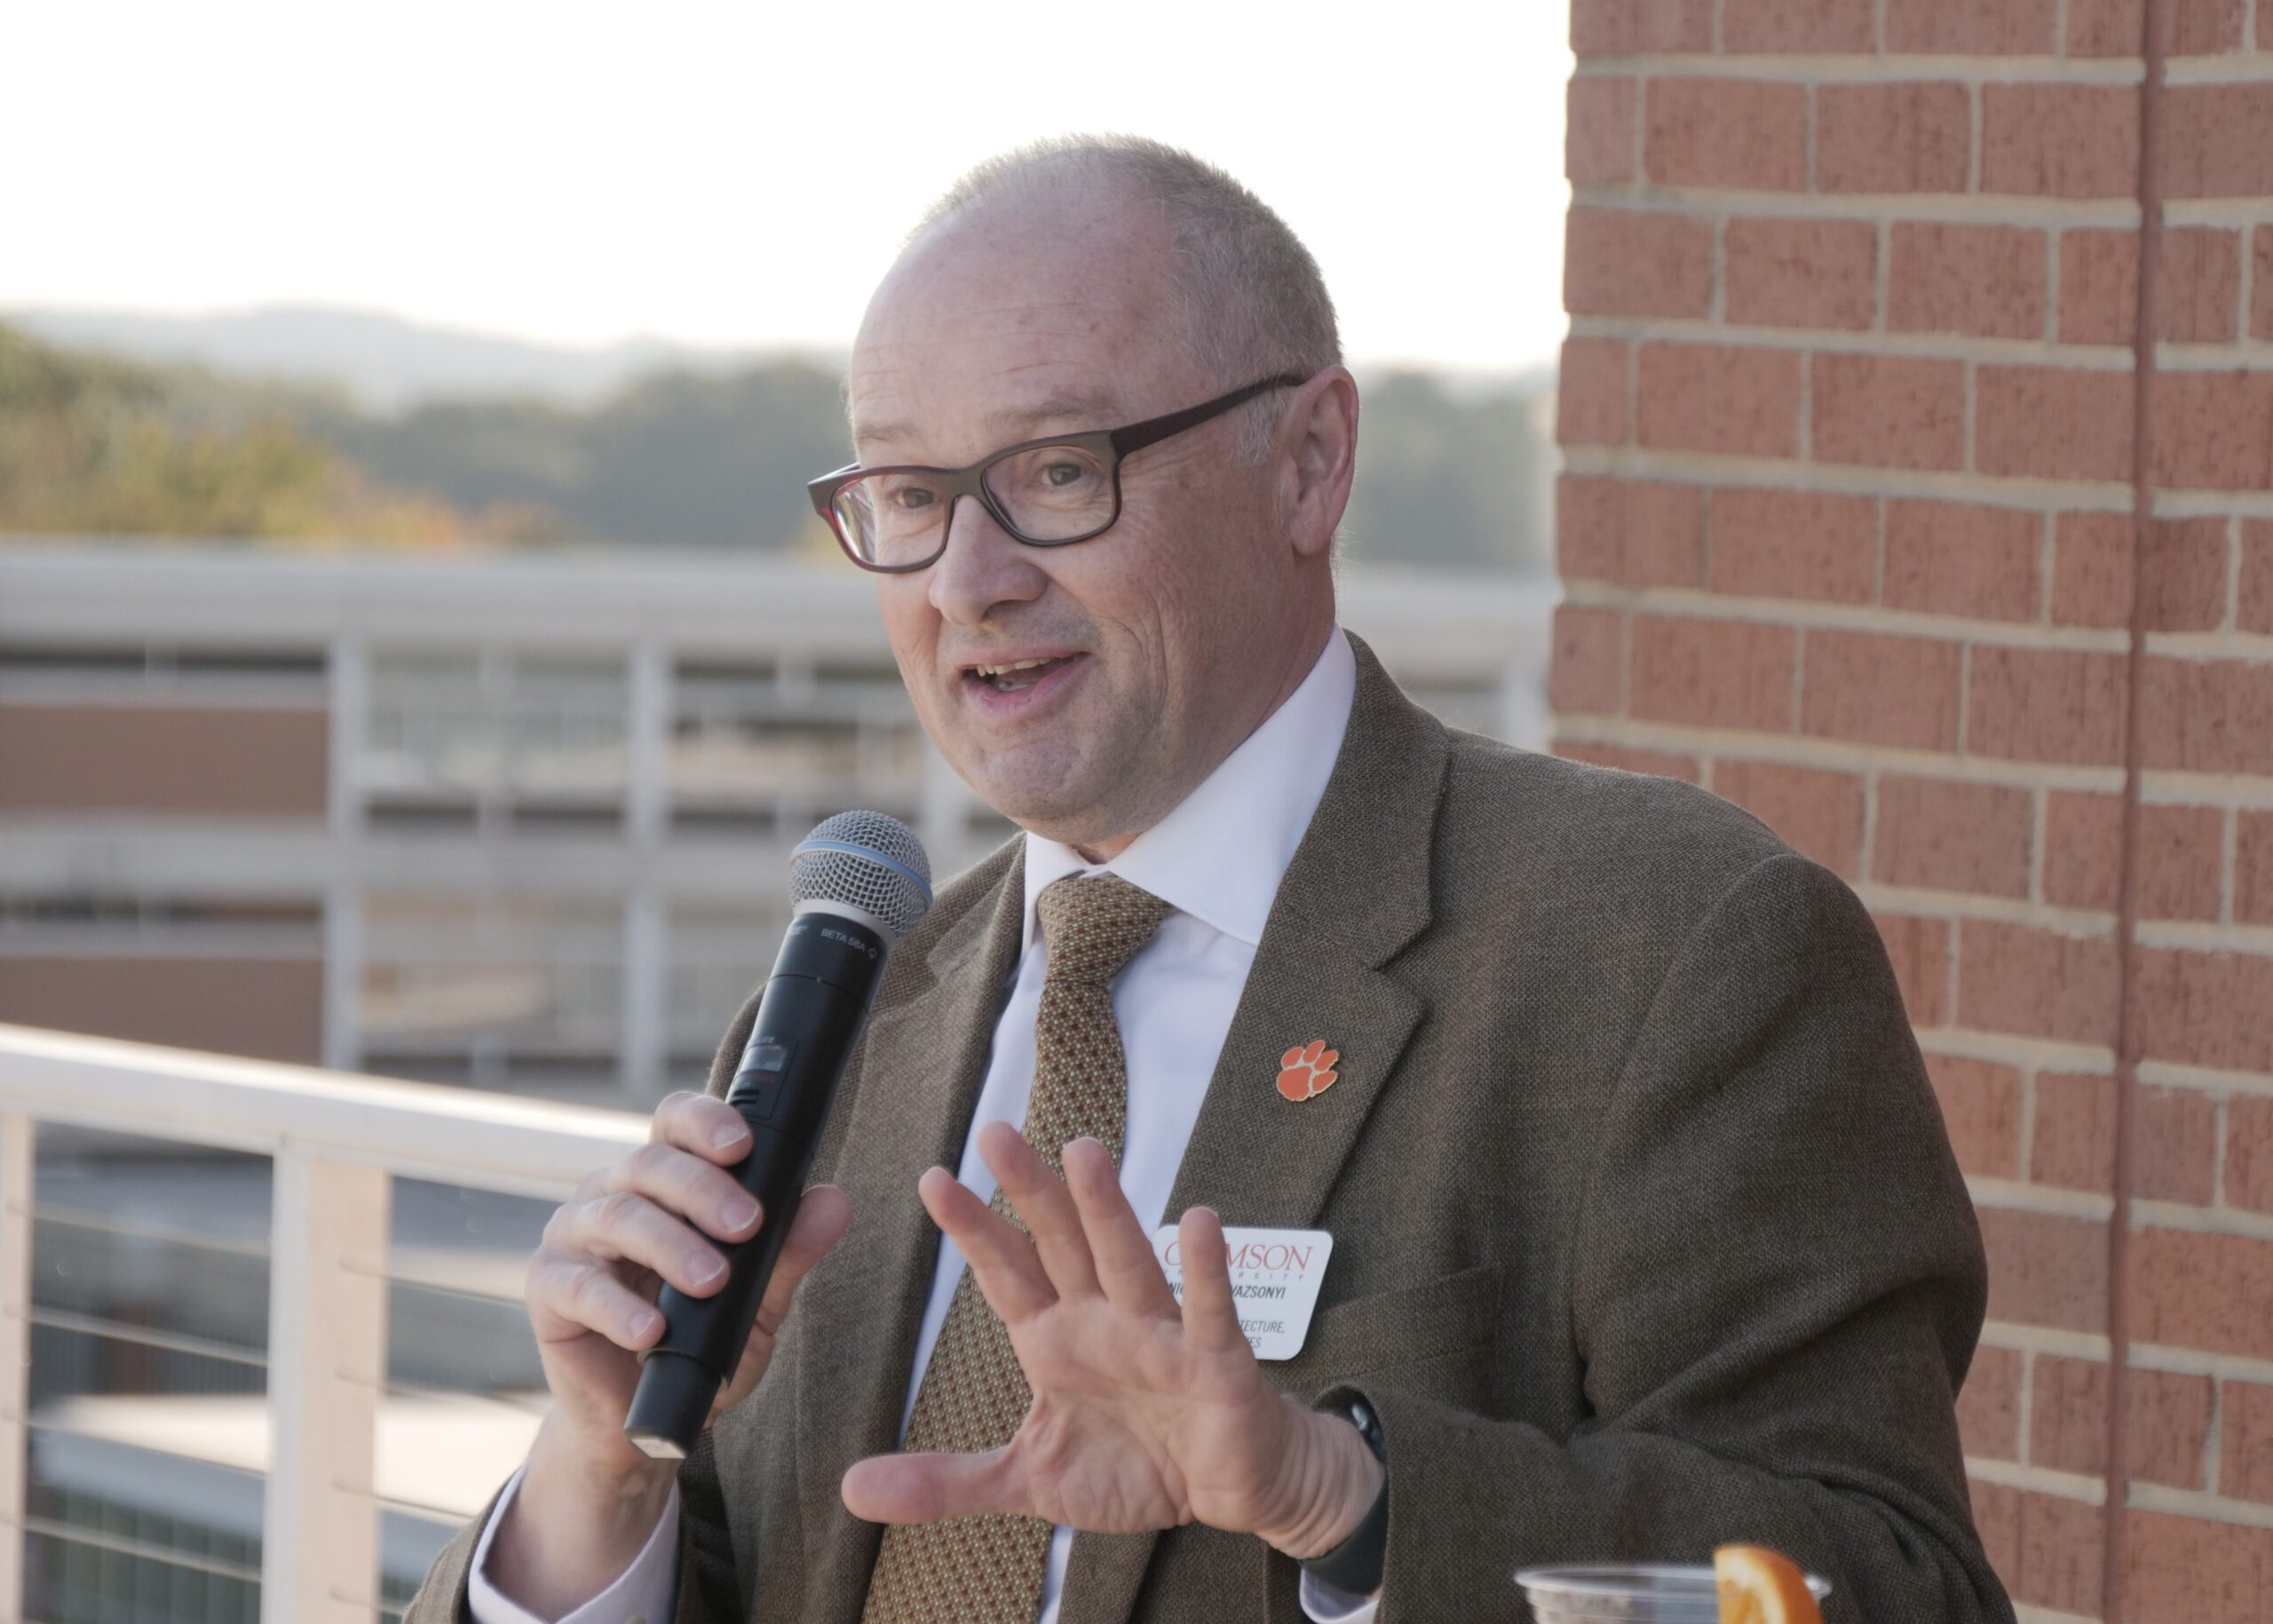 Nicholas Vazsonyi, Dean of the College of Arts and Humanities at Clemson University